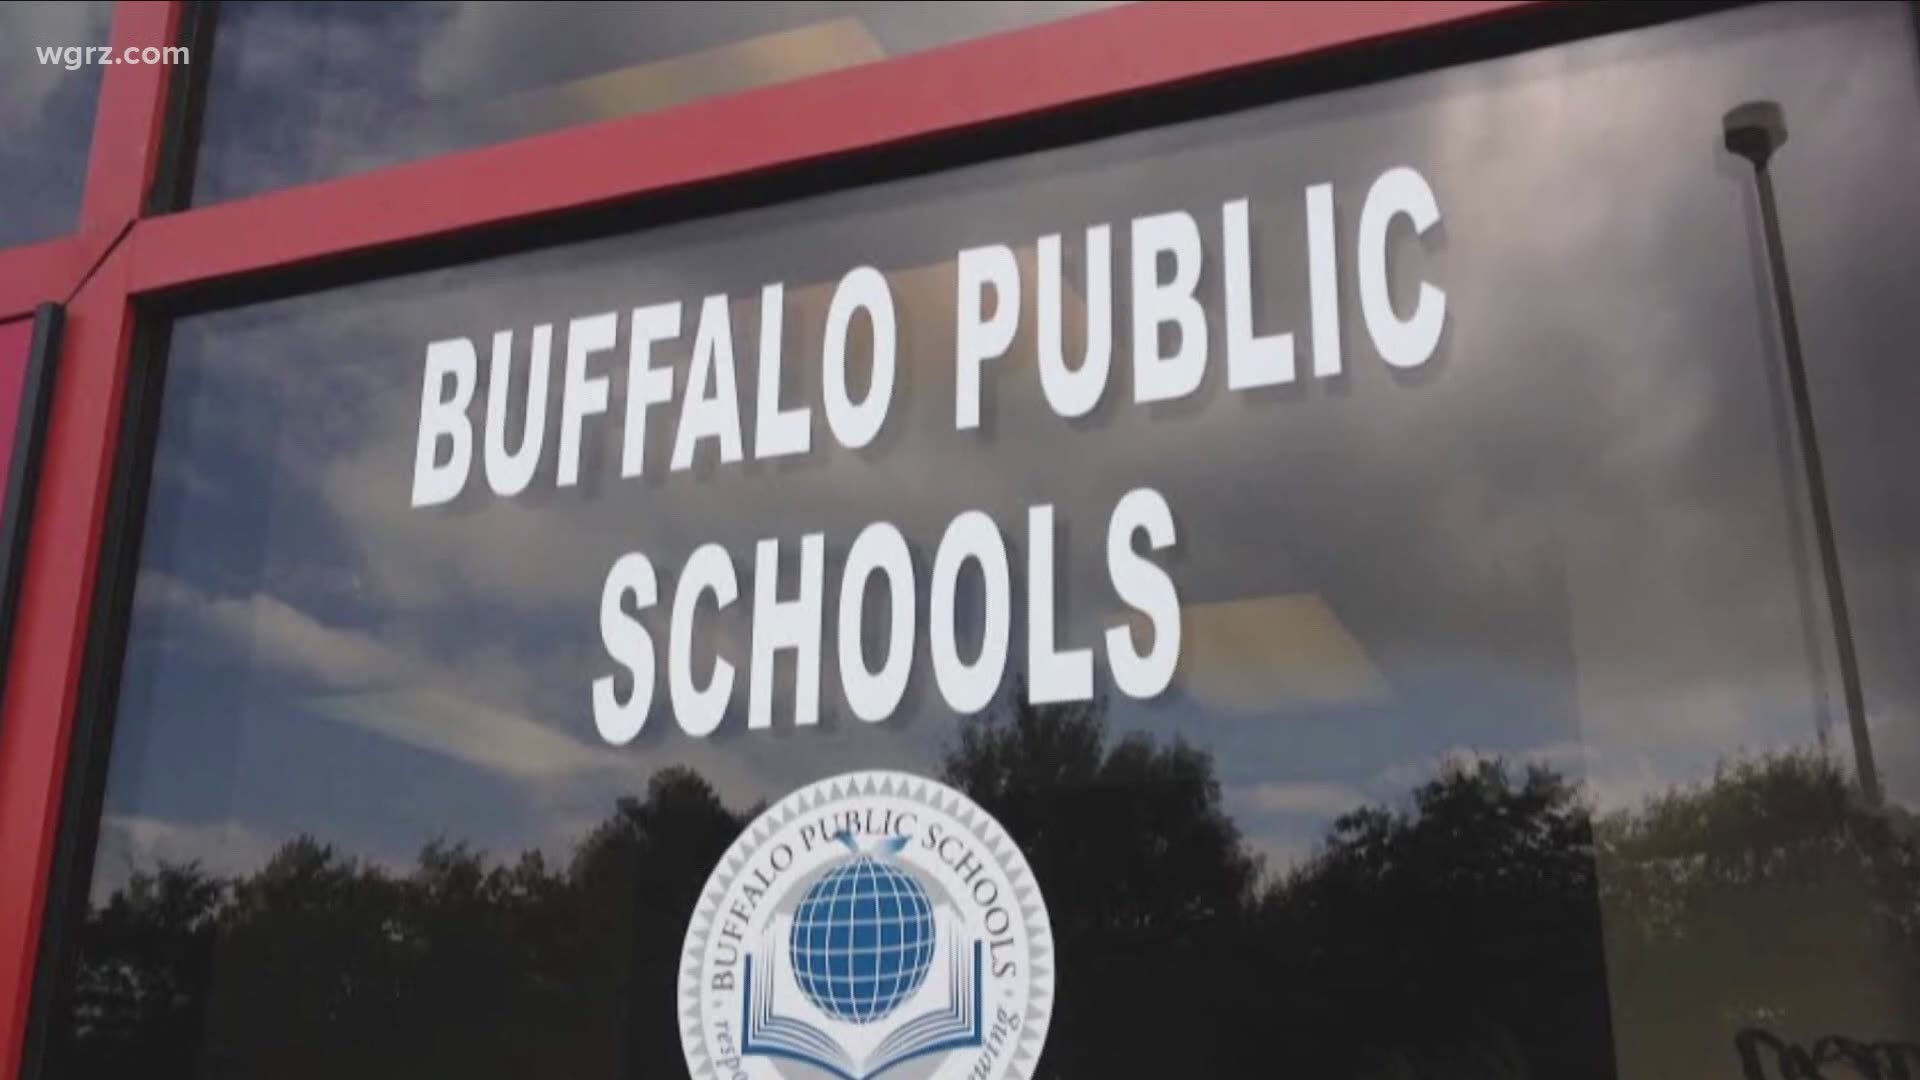 Buffalo Public Schools announced would be keeping all students at home for at least the first several weeks of the school year